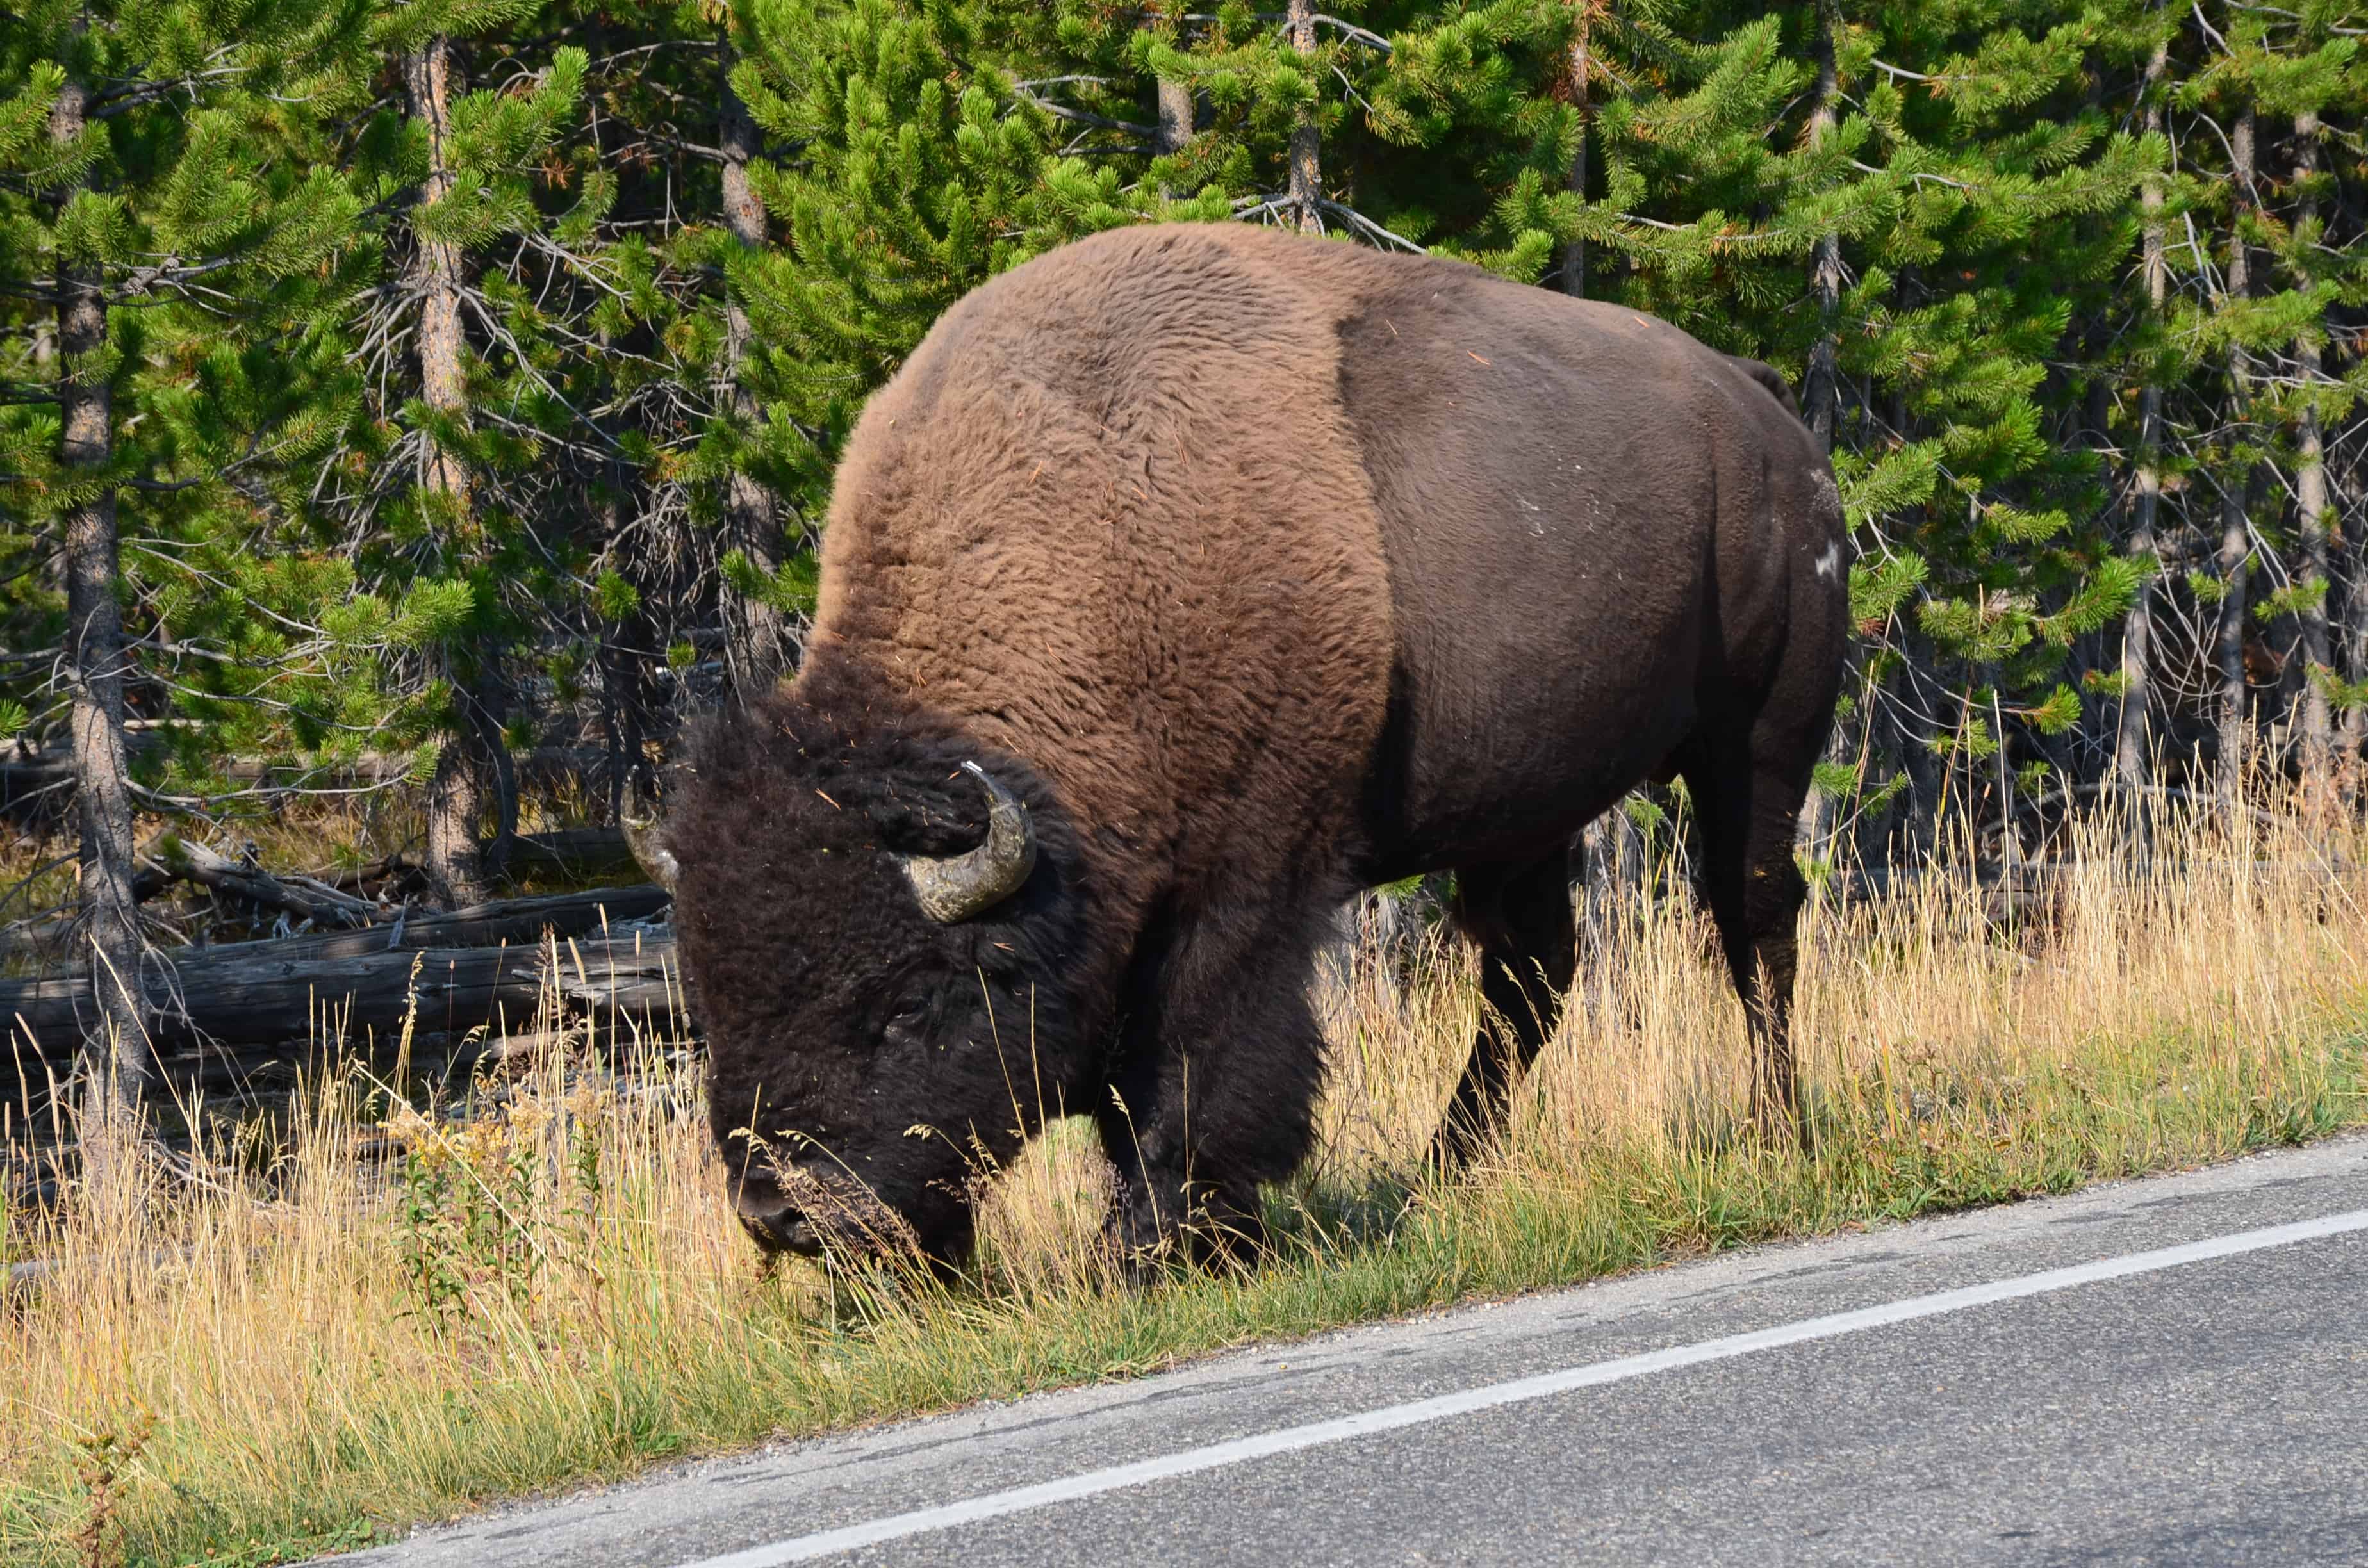 Bison at Yellowstone National Park, Wyoming